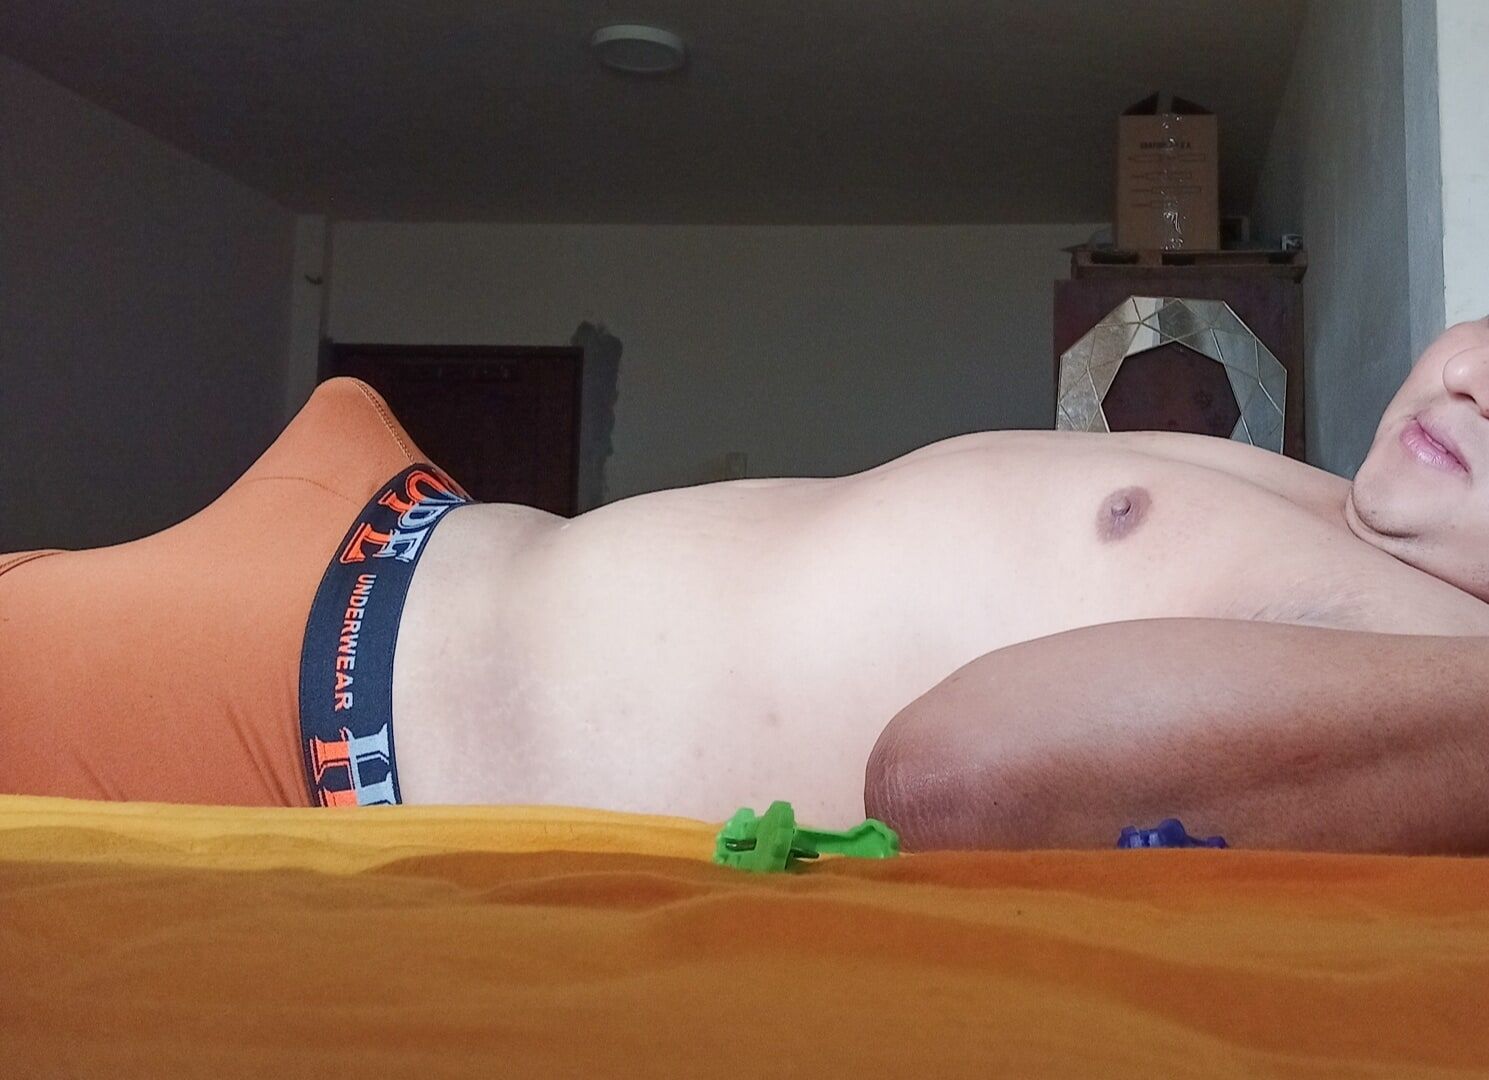 Me Lying Down and my Penis Standing - 01 (In Underwear) #19